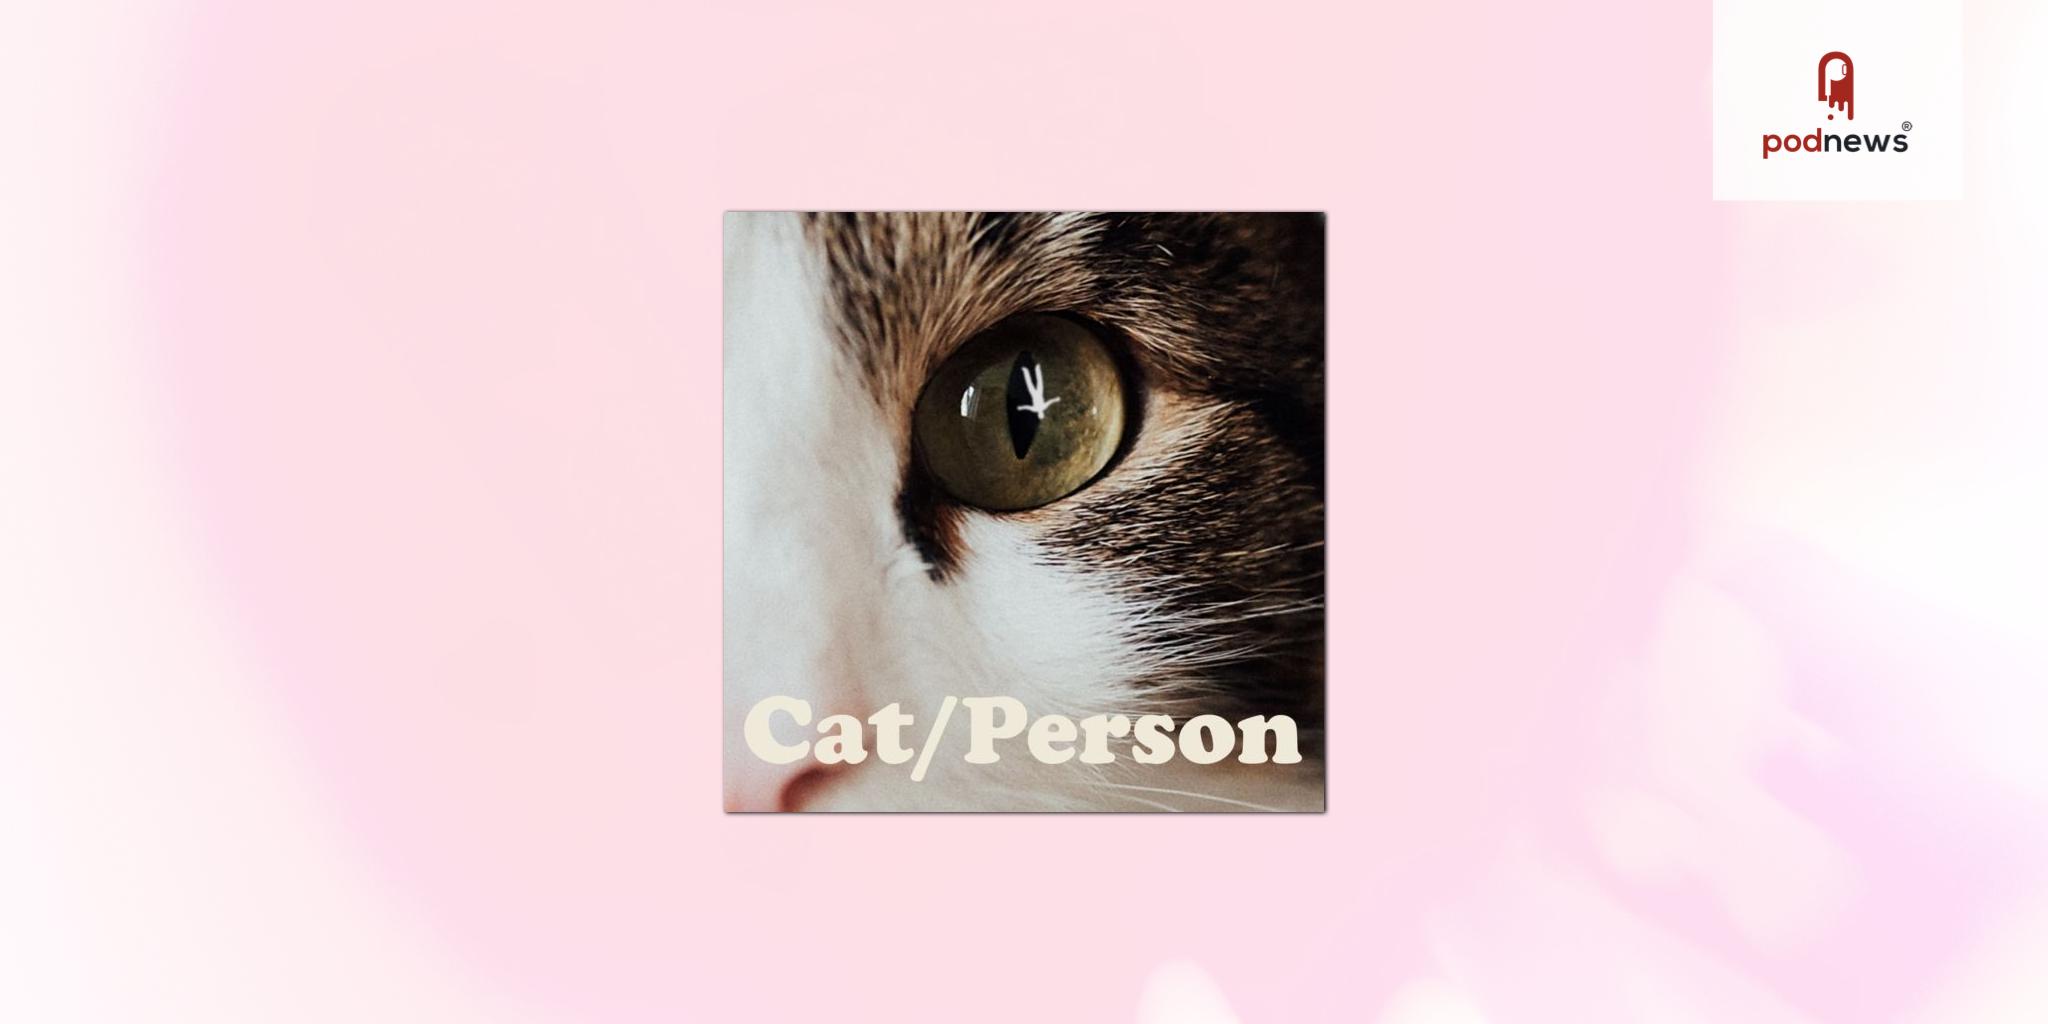 Cat/Person is a brand-new audio sitcom written by Chris Heath